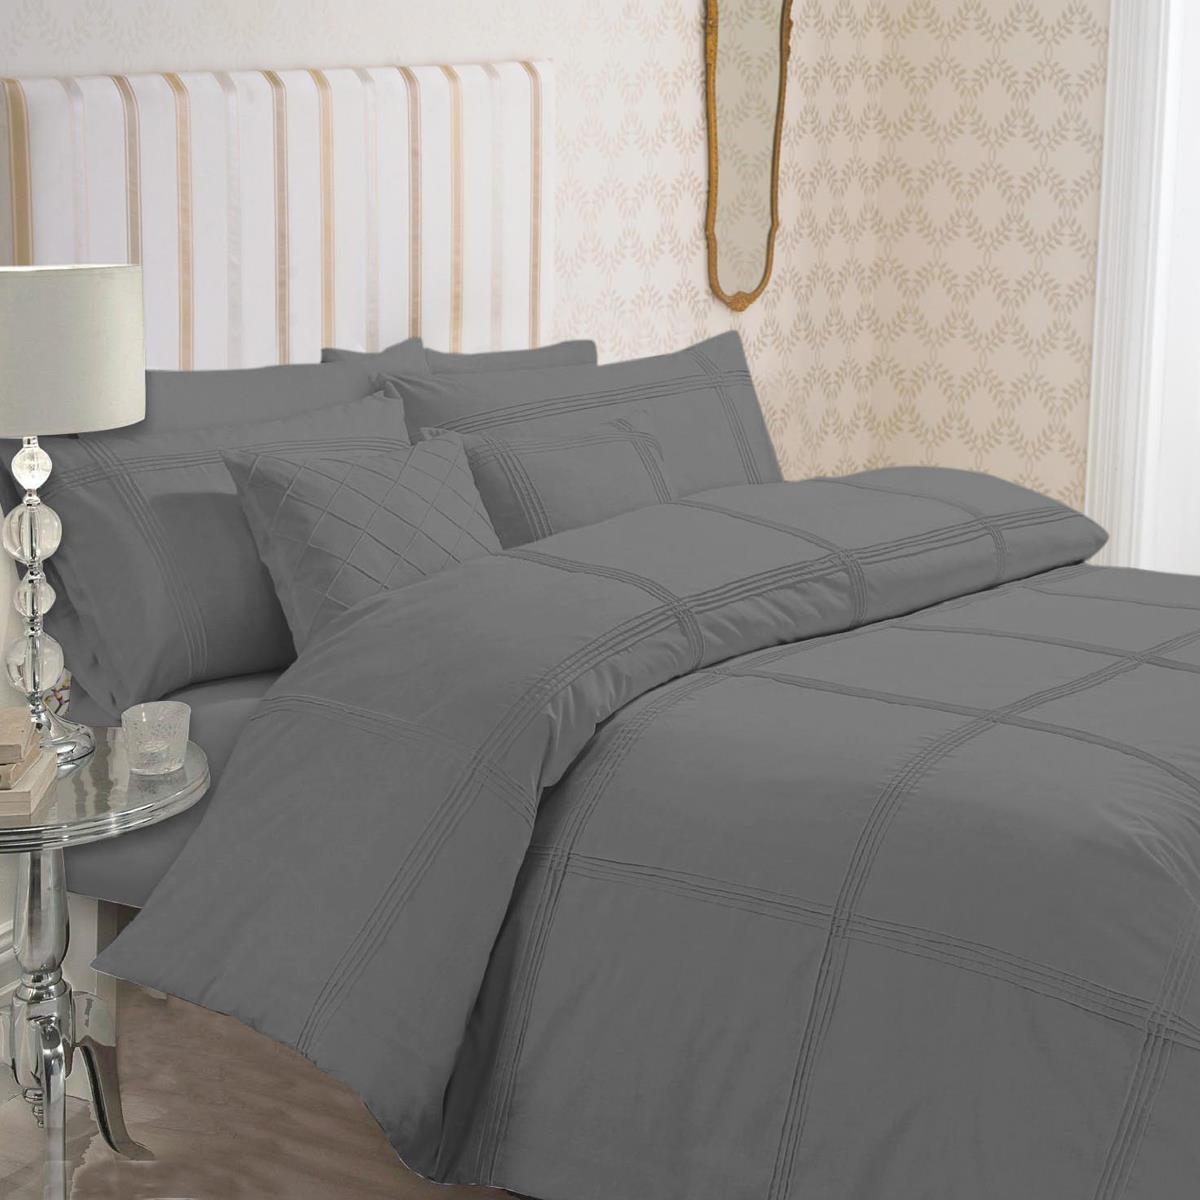 8 Pcs Dyed Pleated Grey Bed Sheet Set With Quilt Pillow And Cushions Covers Hutchpk Online 6656